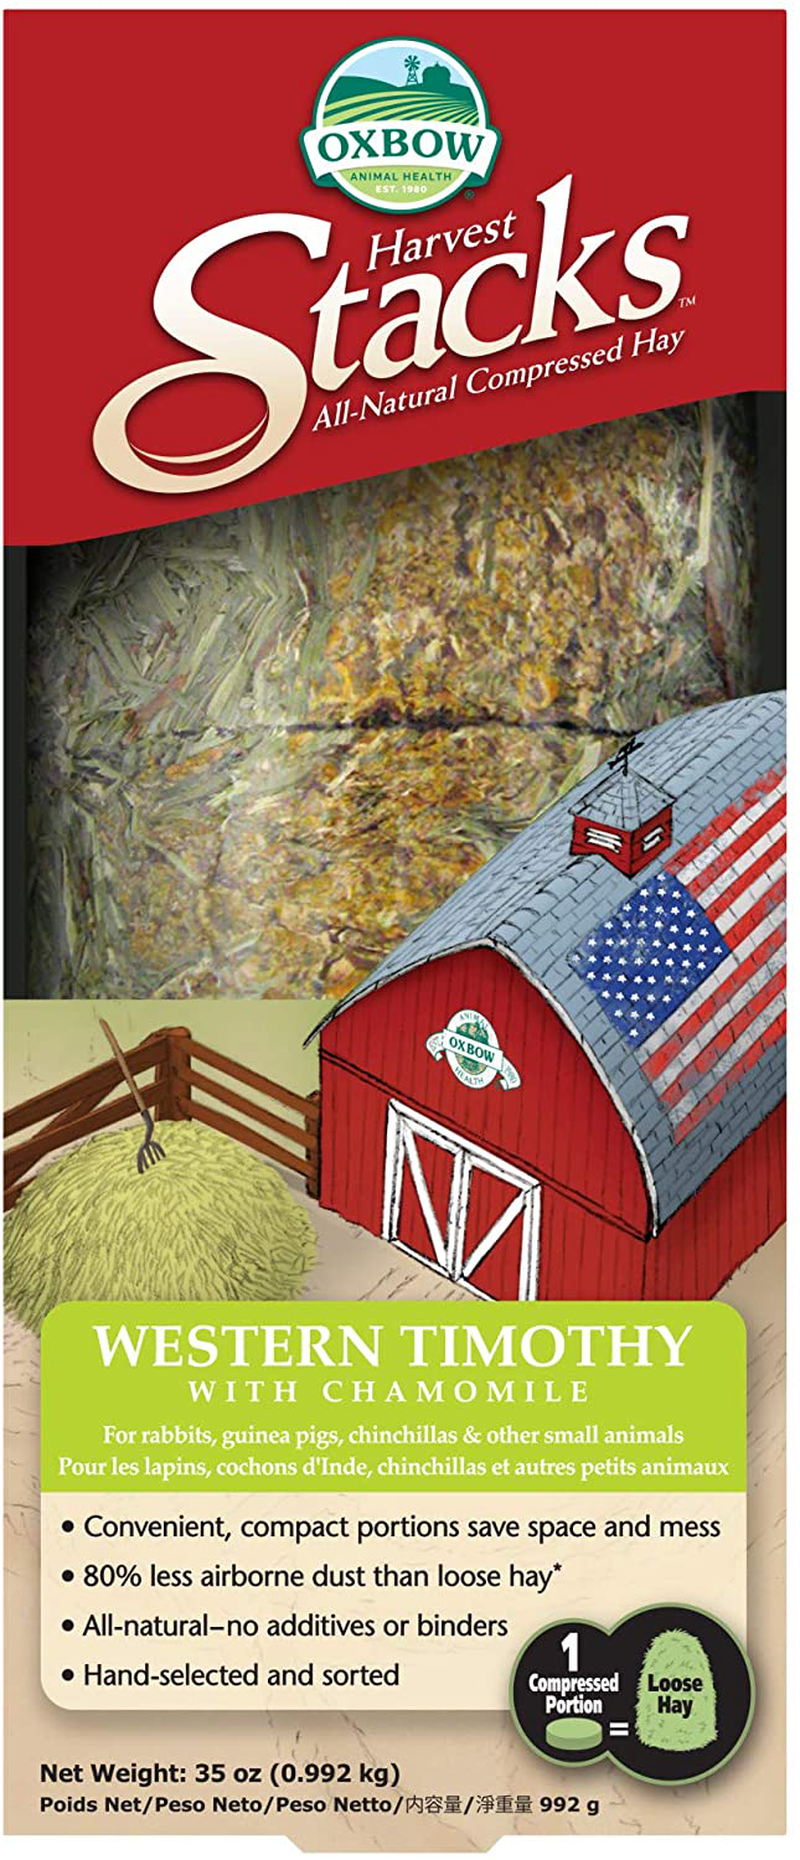 Oxbow Animal Health Harvest Hay Stacks - Western Timothy Hay - All Natural Hay for Small Pets - 35 Oz.